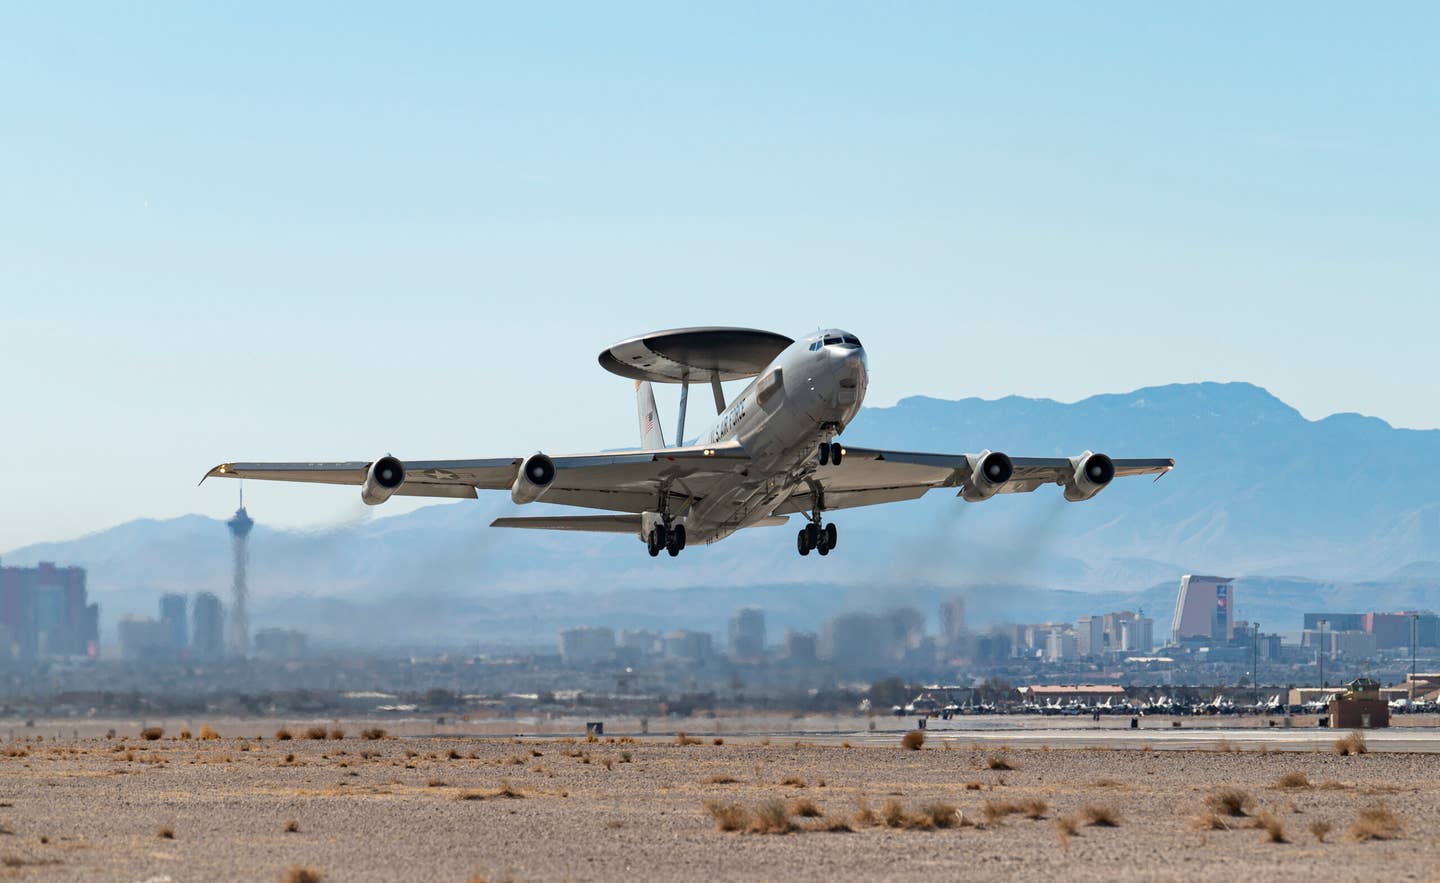 An E-3A Sentry AWACS aircraft takes off from Nellis Air Force Base in Nevada during the Red Flag 22-1 exercise in February 2022. <em>U.S. Air Force photo by William R. Lewis</em>